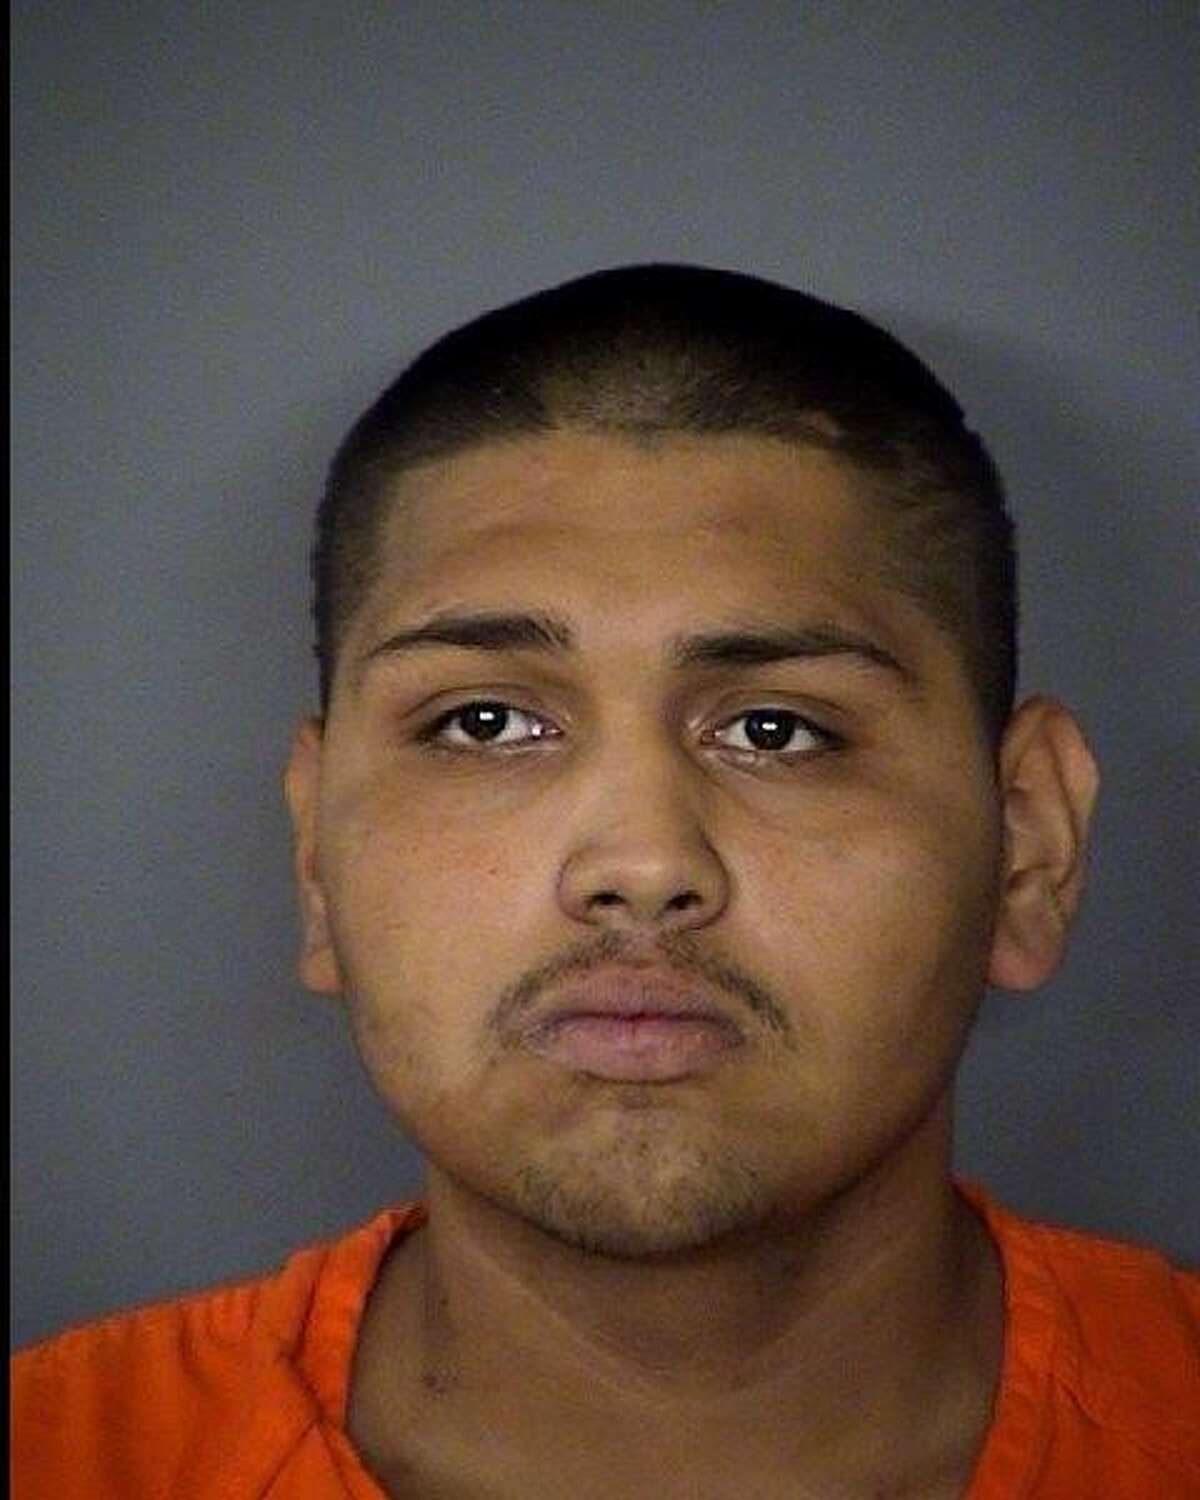 Manuel Watson was arrested in connection with the death of a 7-year-old girl on the West Side on June 1, according to SAPD.